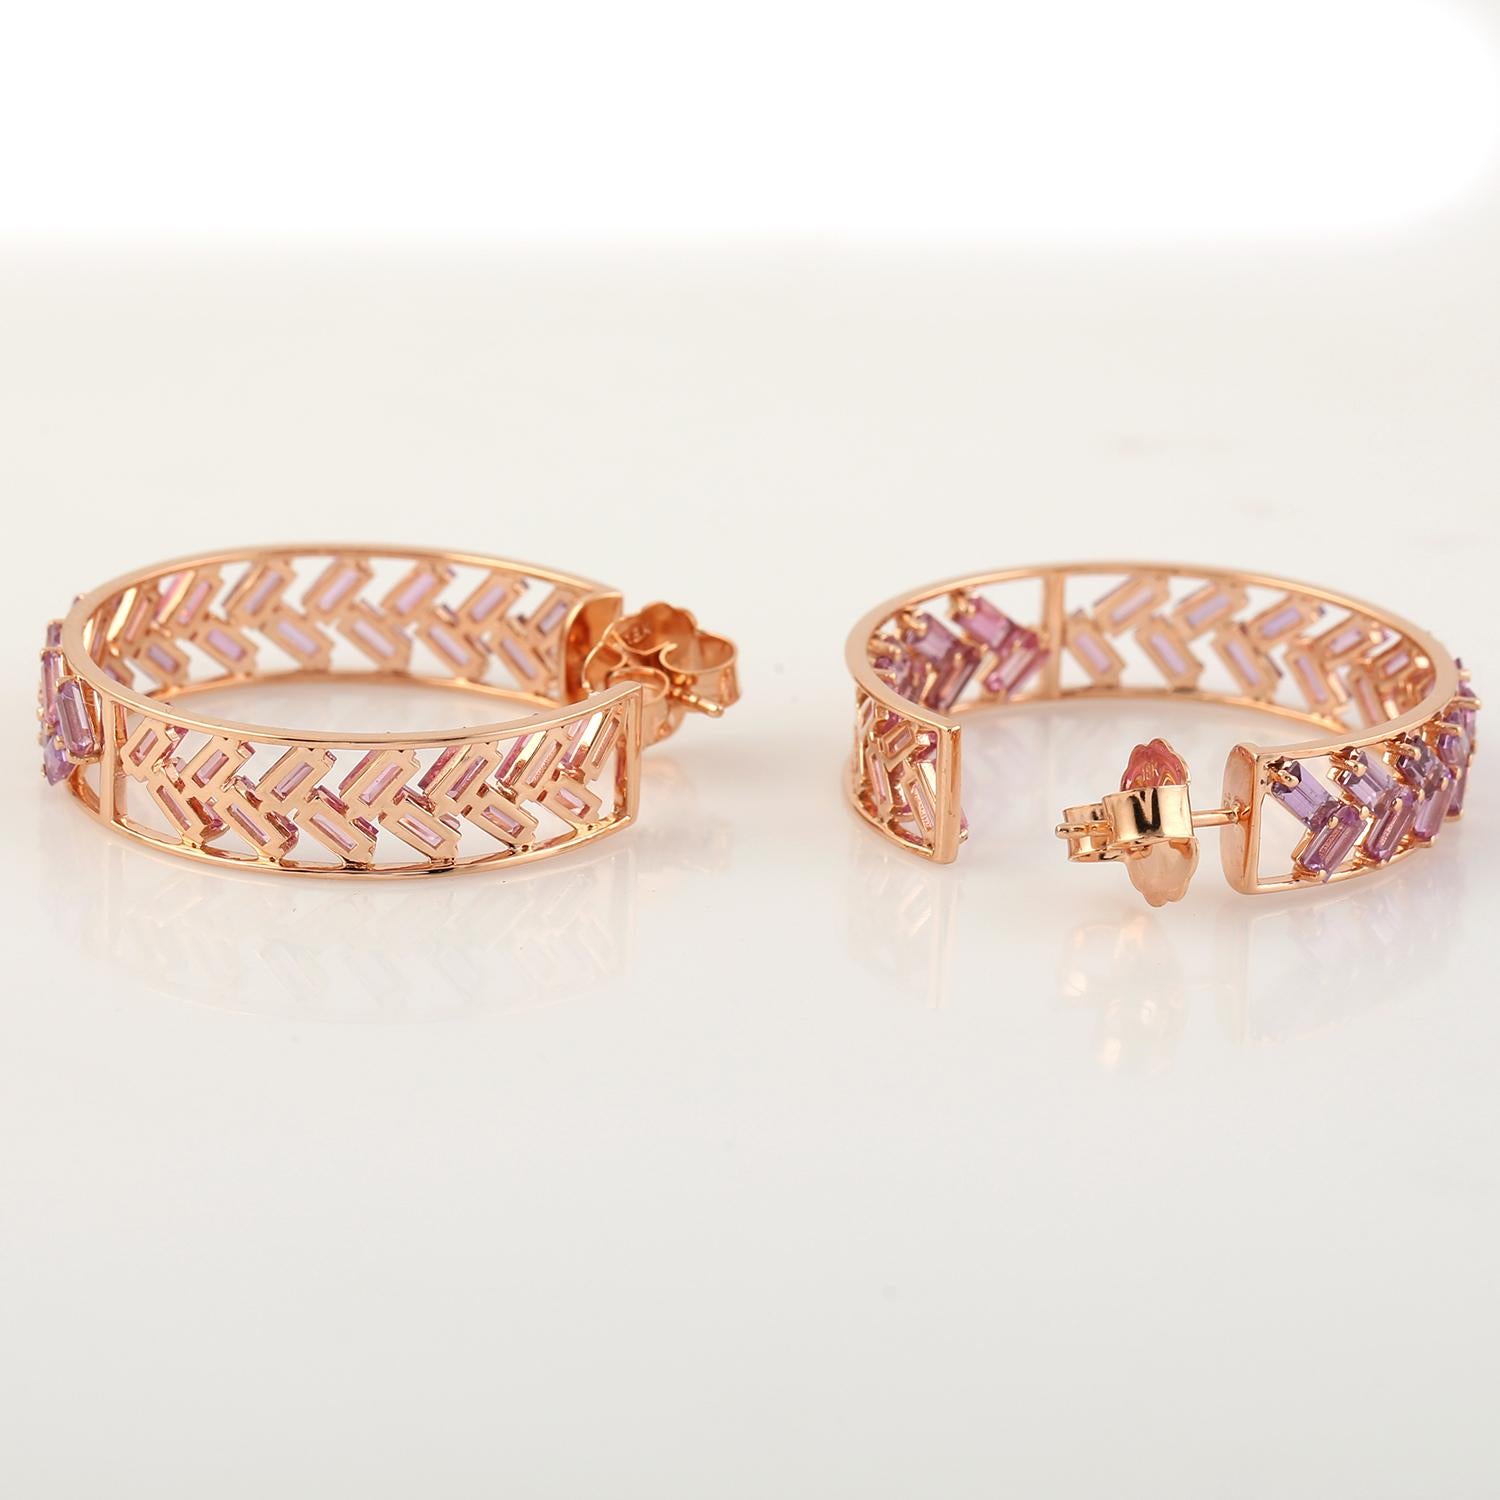 Contemporary 11.81 ct Baguette Shaped Pink Sapphire Hoop Earrings Made In 18K Rose Gold For Sale